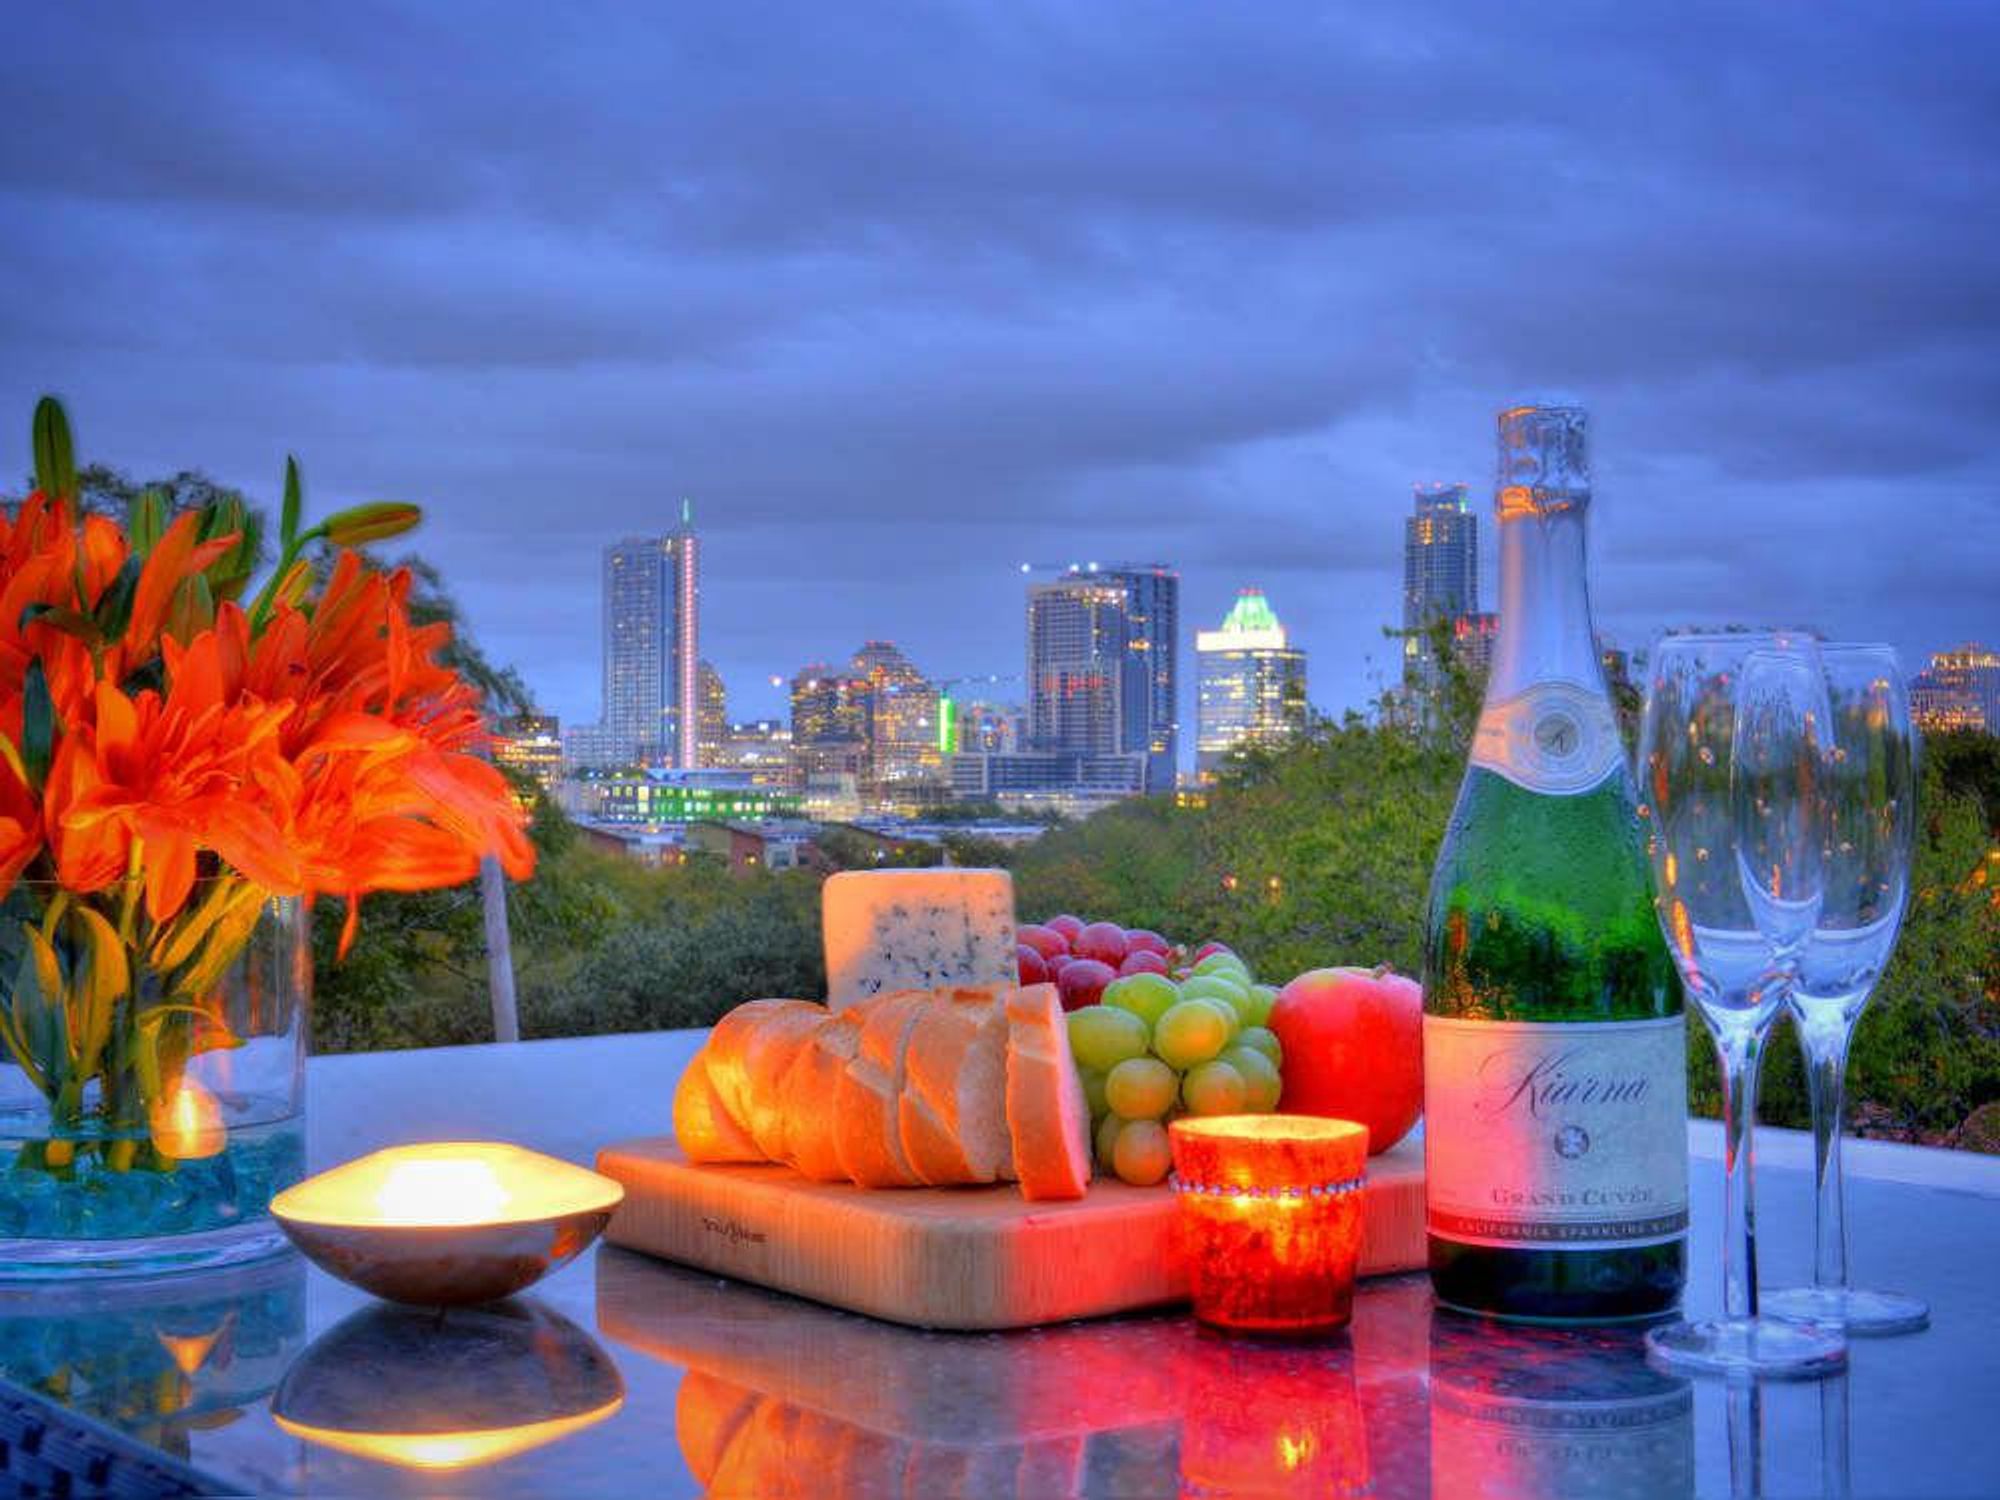 The roof terrace at 601 Kinney Ave. provided an amazing view of downtown Austin.